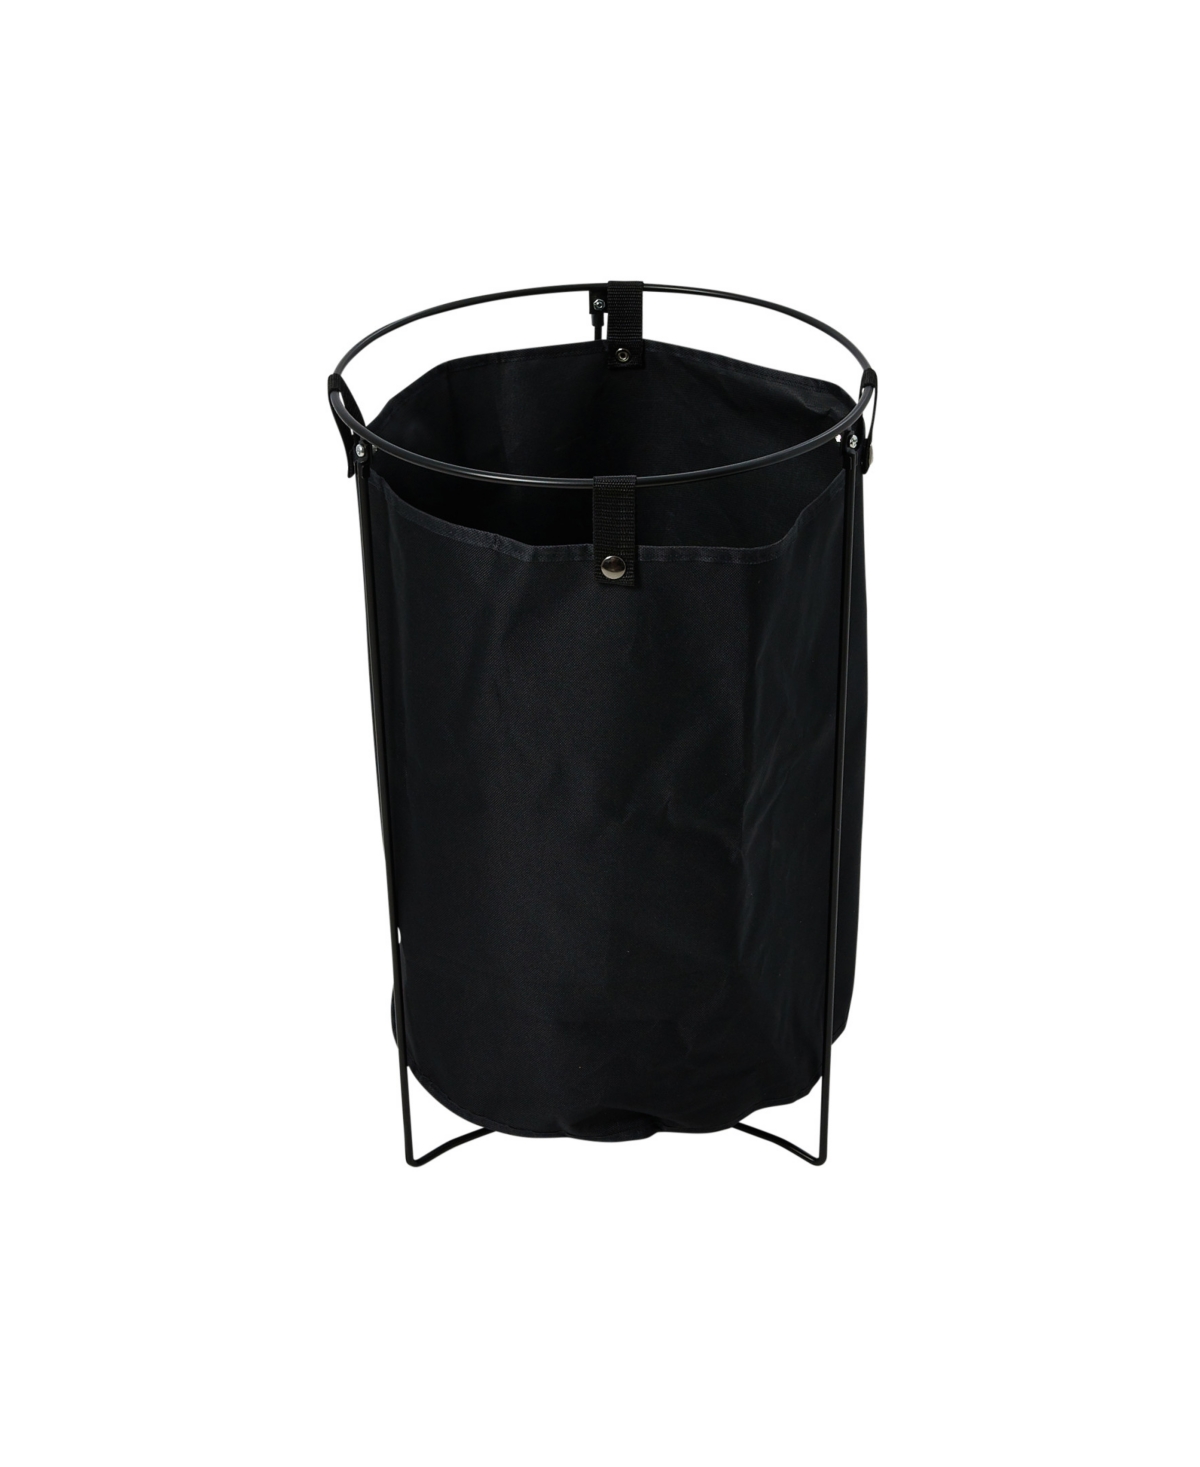 Metal Wire Frame Laundry Hamper with Removable Canvas Bag - Black